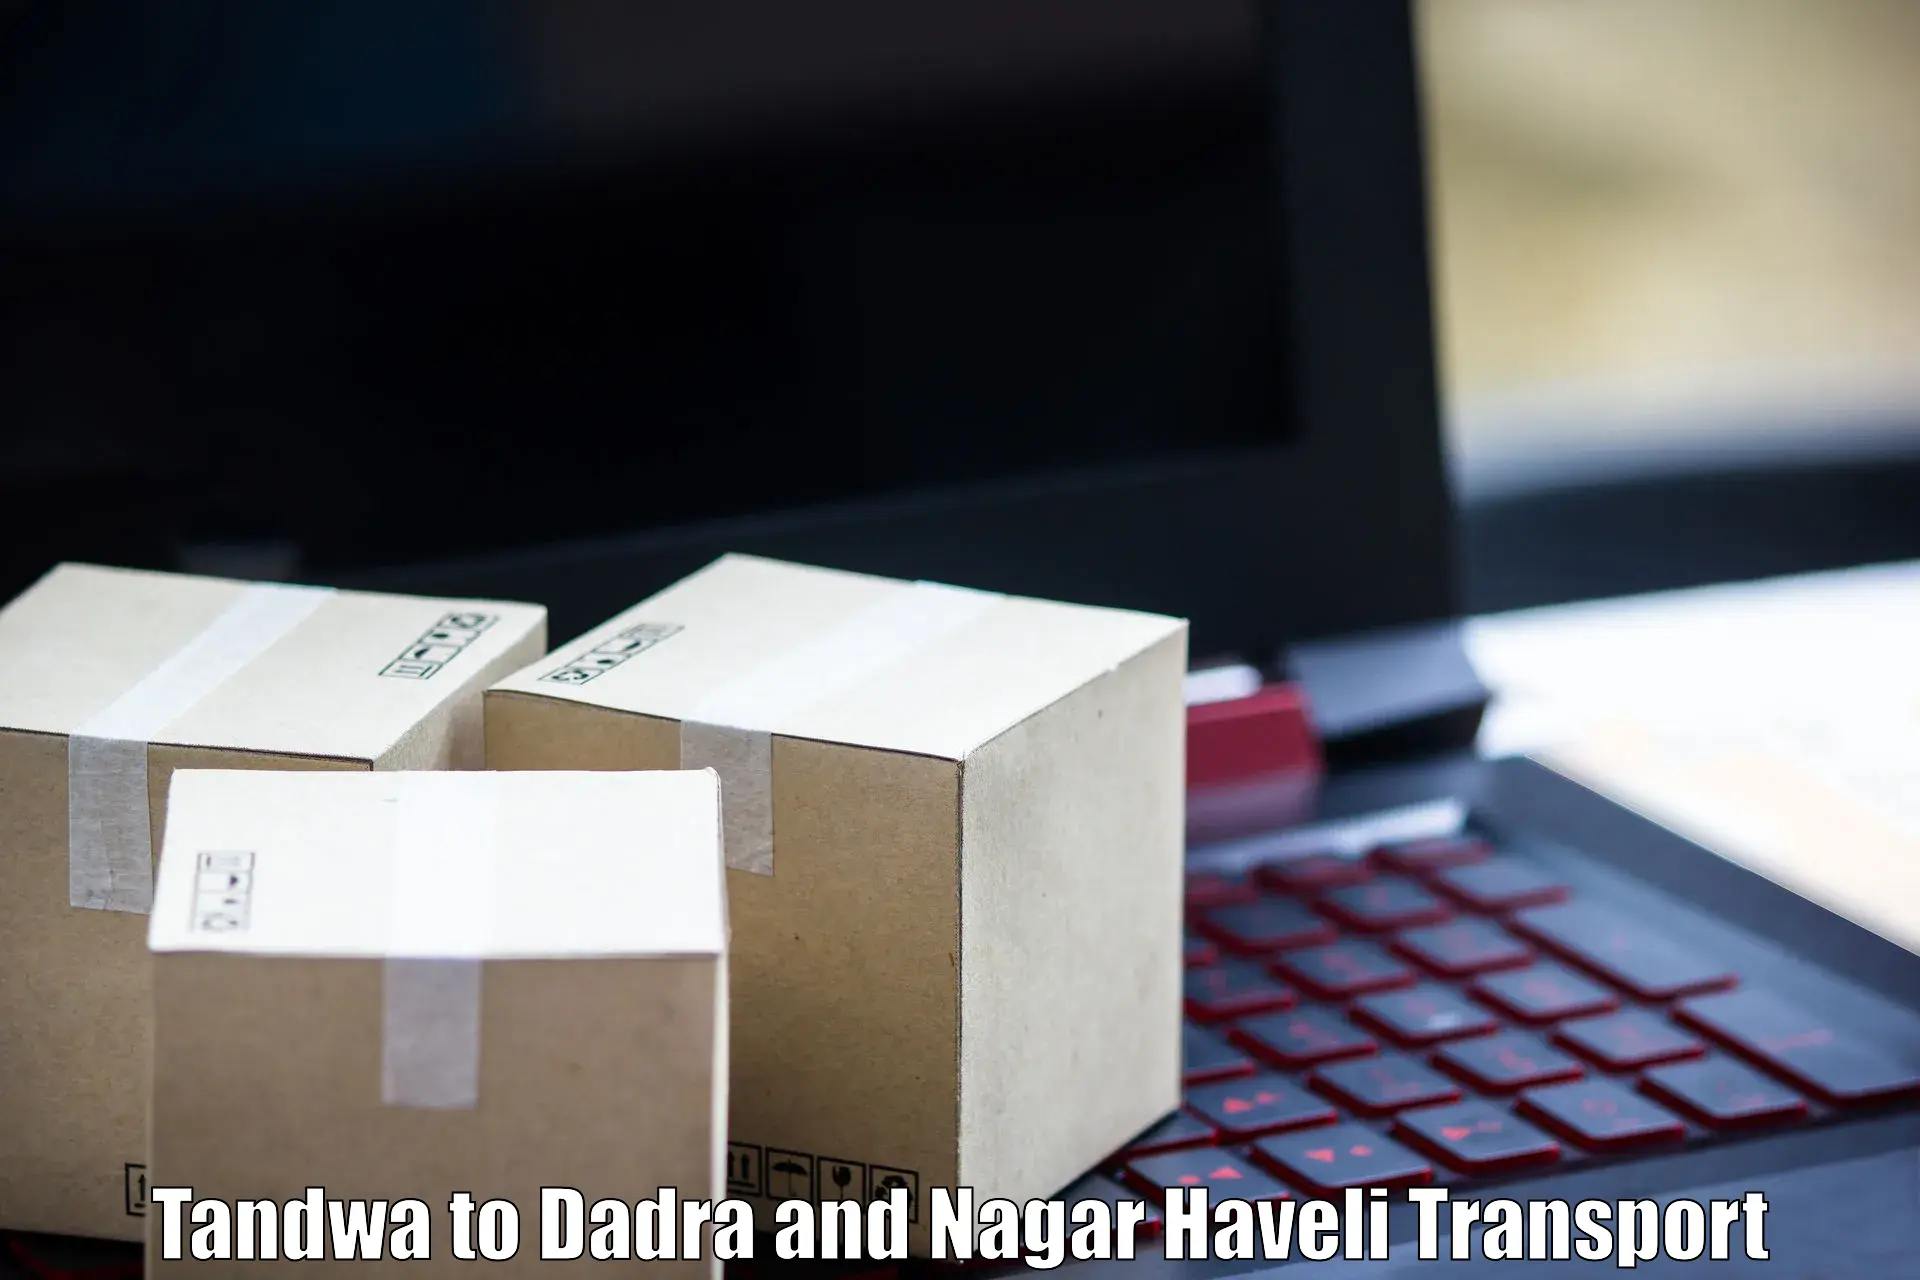 Air cargo transport services in Tandwa to Dadra and Nagar Haveli